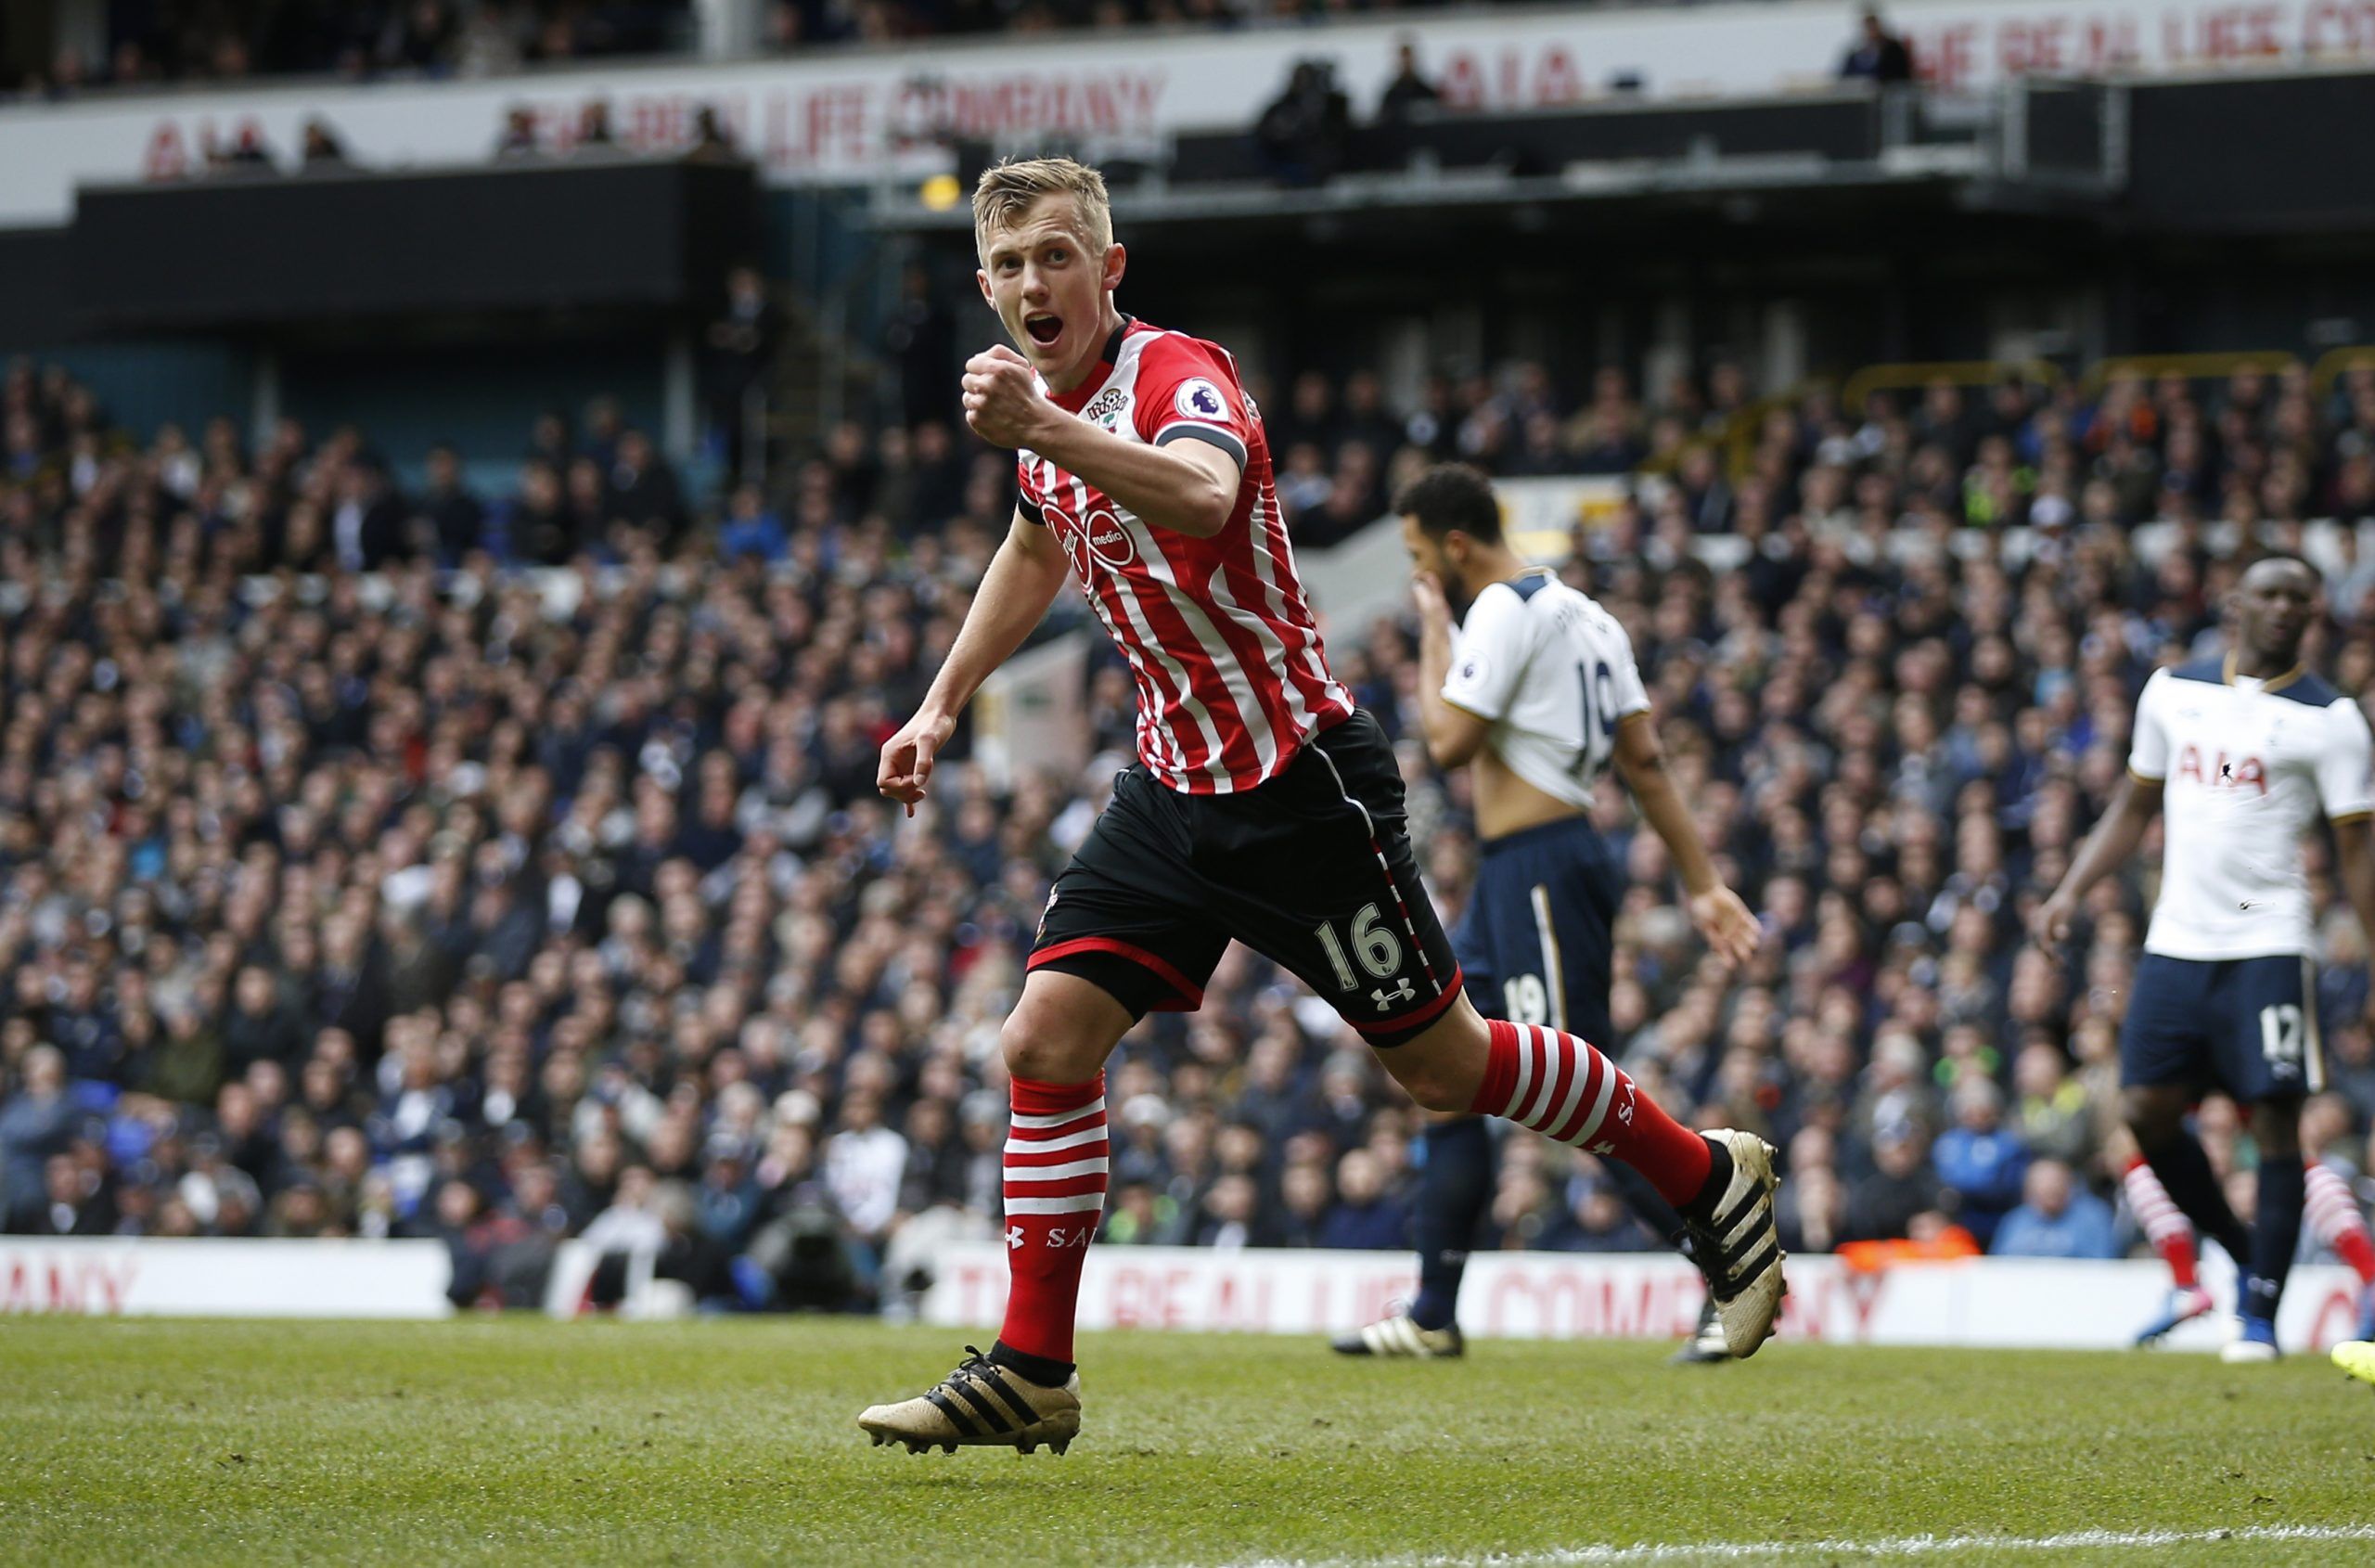 Britain Soccer Football - Tottenham Hotspur v Southampton - Premier League - White Hart Lane - 19/3/17 Southampton's James Ward-Prowse celebrates scoring their first goal  Action Images via Reuters / Andrew Couldridge Livepic EDITORIAL USE ONLY. No use with unauthorized audio, video, data, fixture lists, club/league logos or 